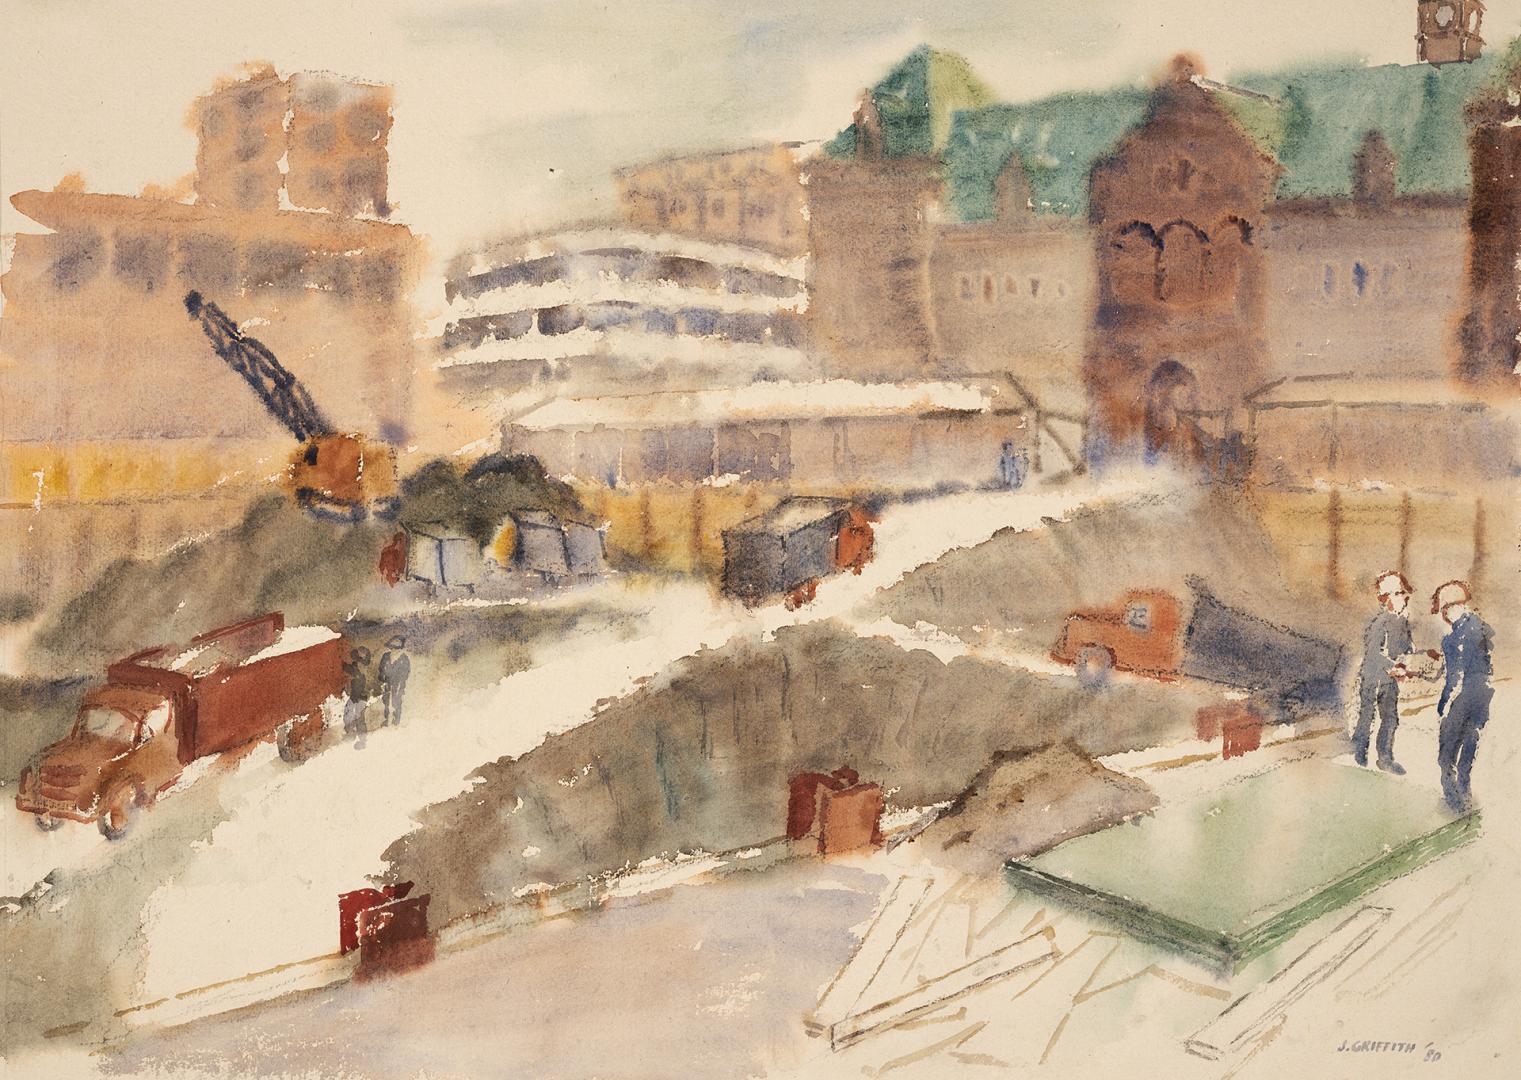 A painting of an urban area under construction, depicting workers and construction equipment in ...